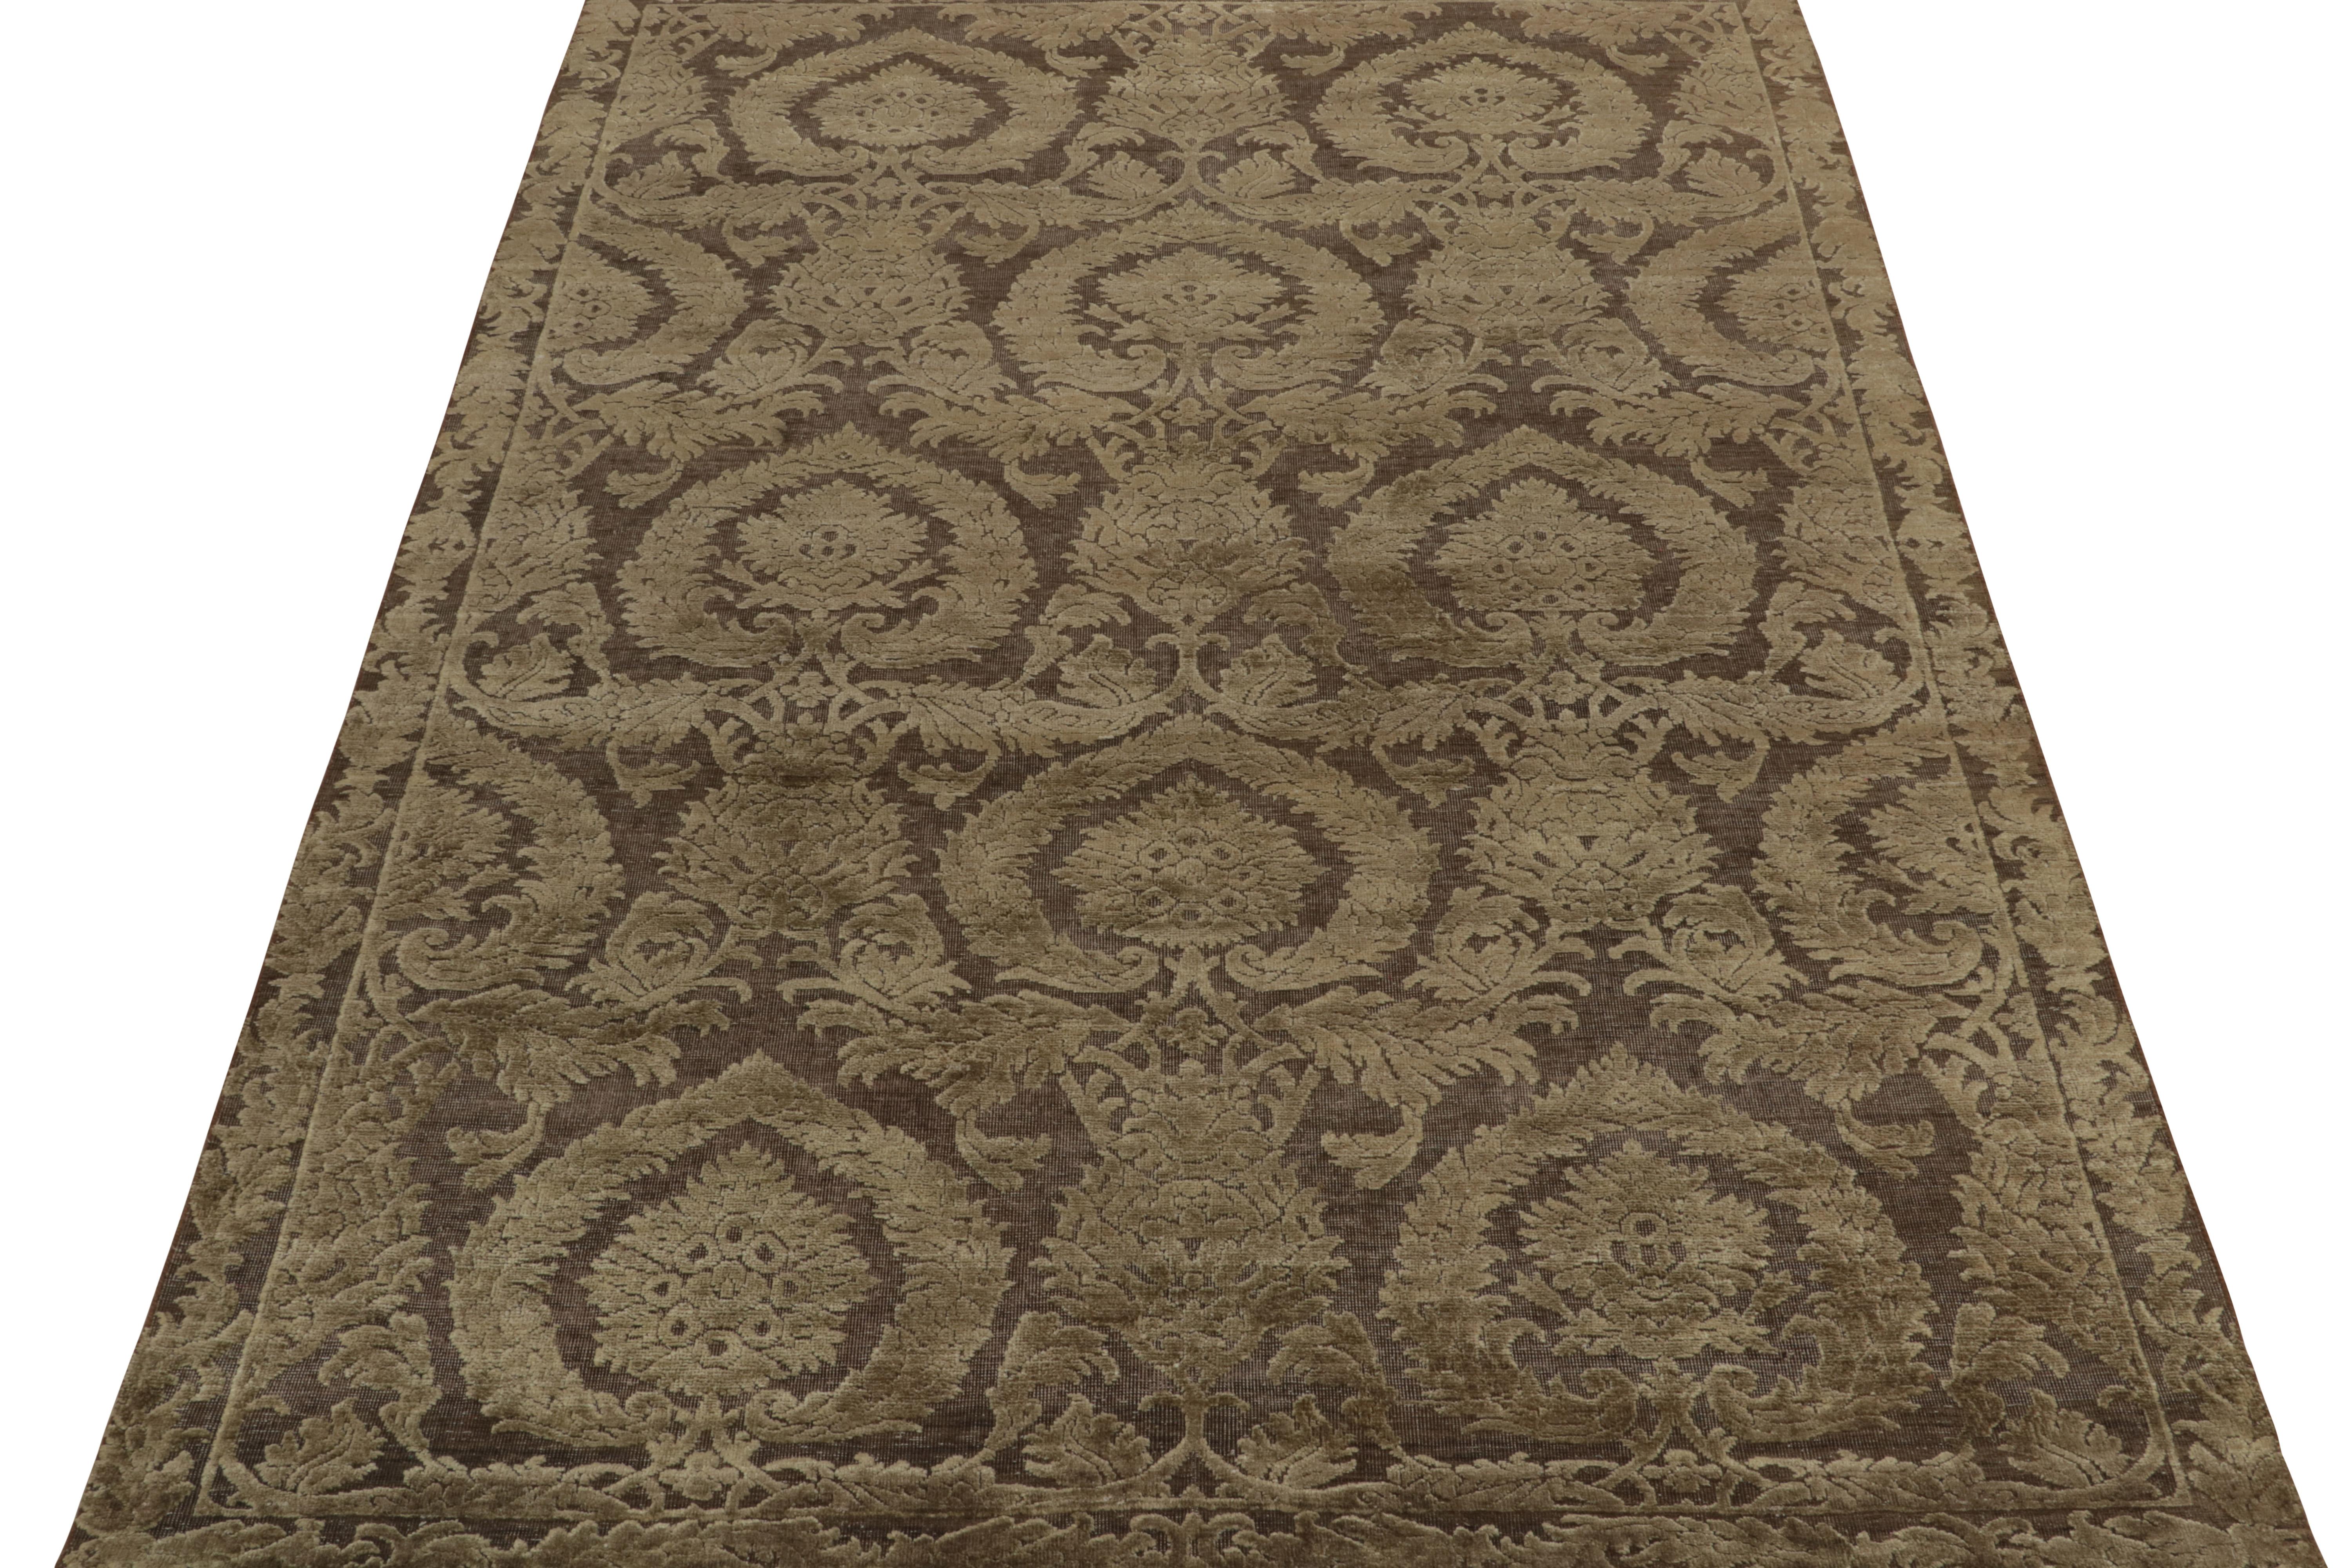 Indian Rug & Kilim’s Classic Italian Style Rug in Beige-Brown Floral Patterns For Sale